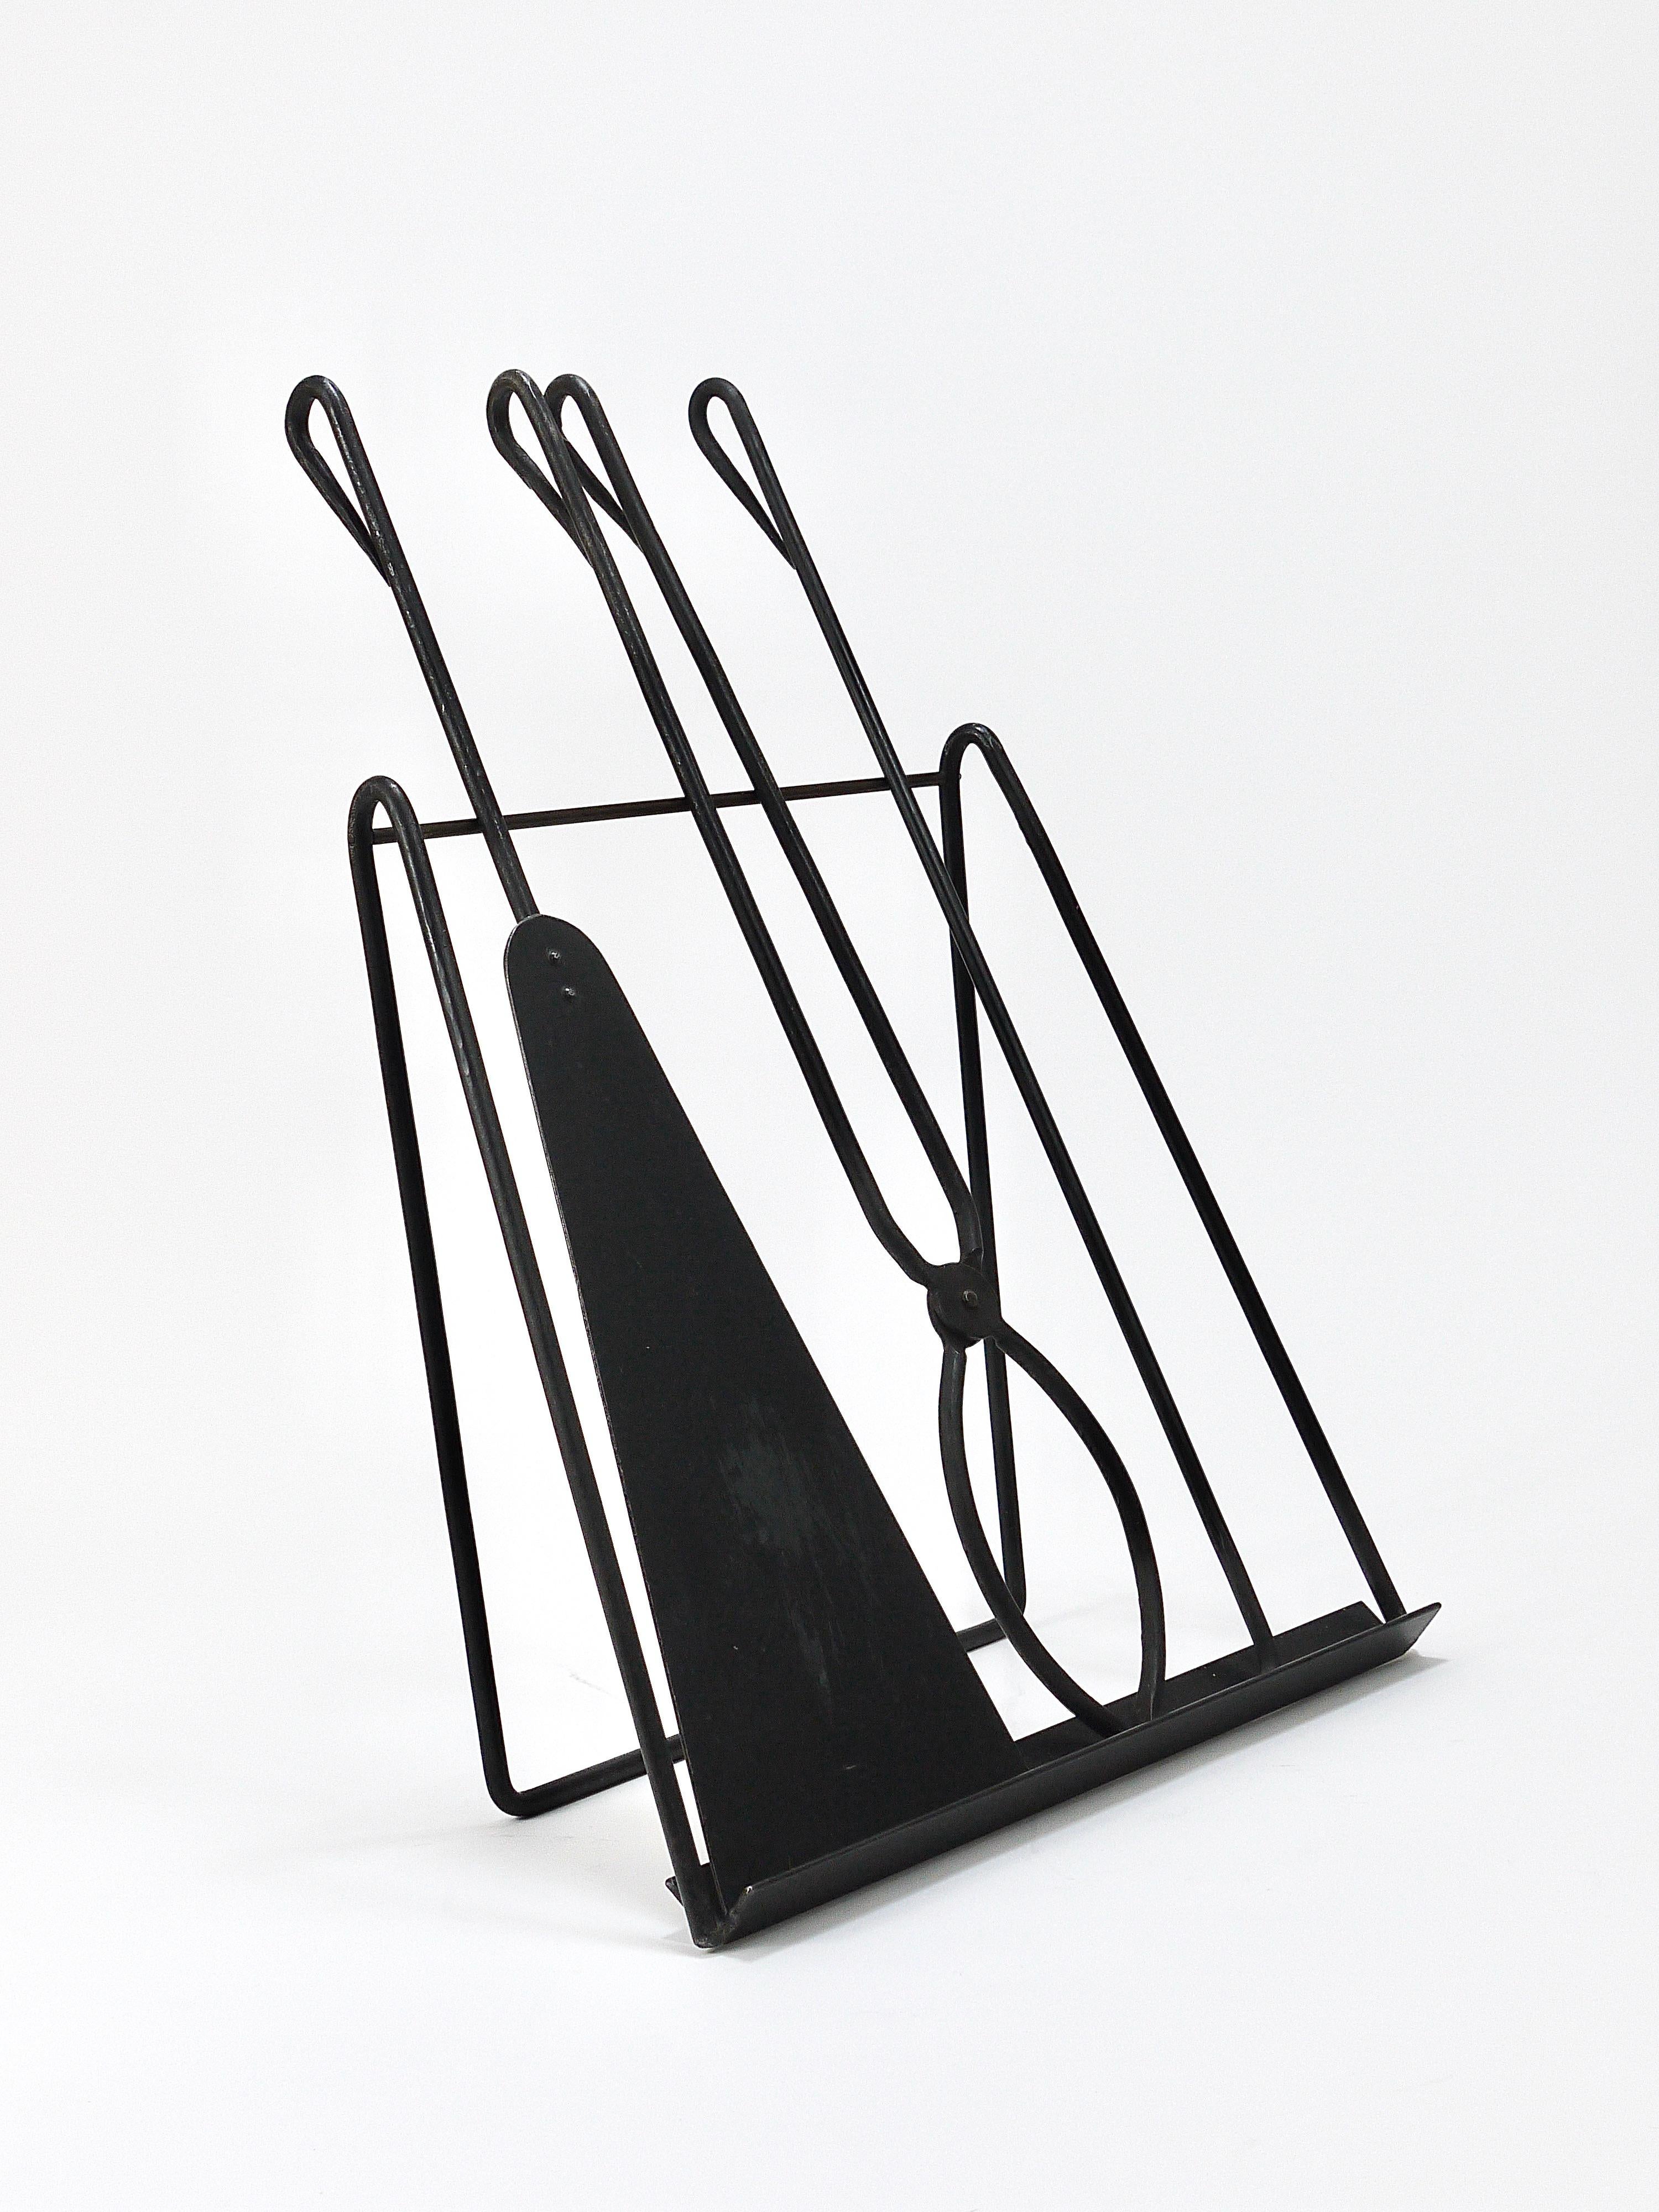 A minimalistic, beautiful Modernist set of three fire tools and stand, designed and executed by Viennese designer Carl Auböck II (1900-1957) in Austria. An original work from the late 1940s, model #4180. Hand-forged of wrought iron, this set